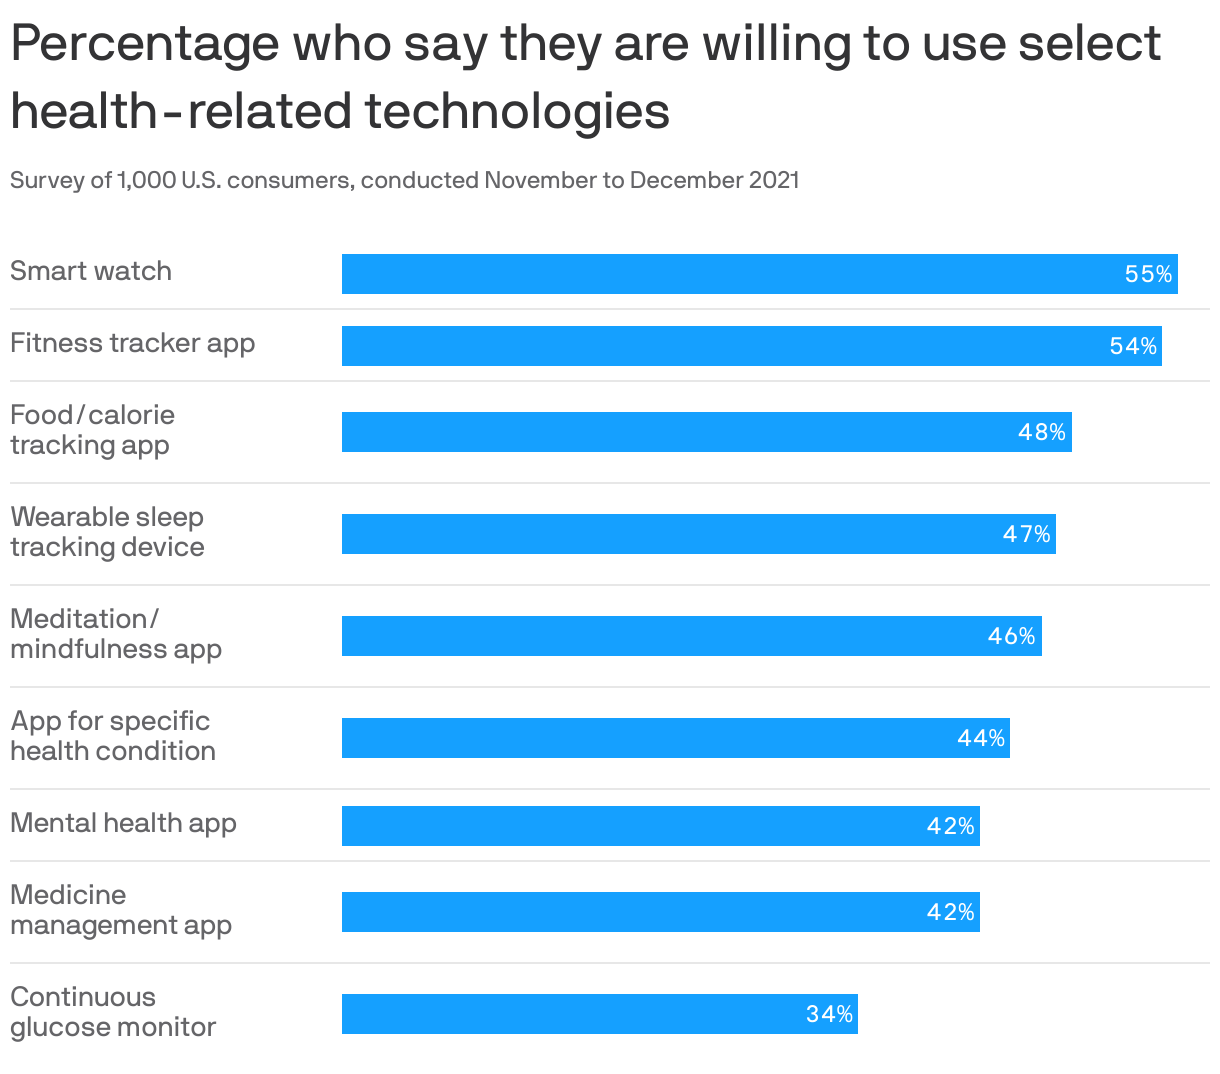 Percentage who say they are willing to use select health-related technologies